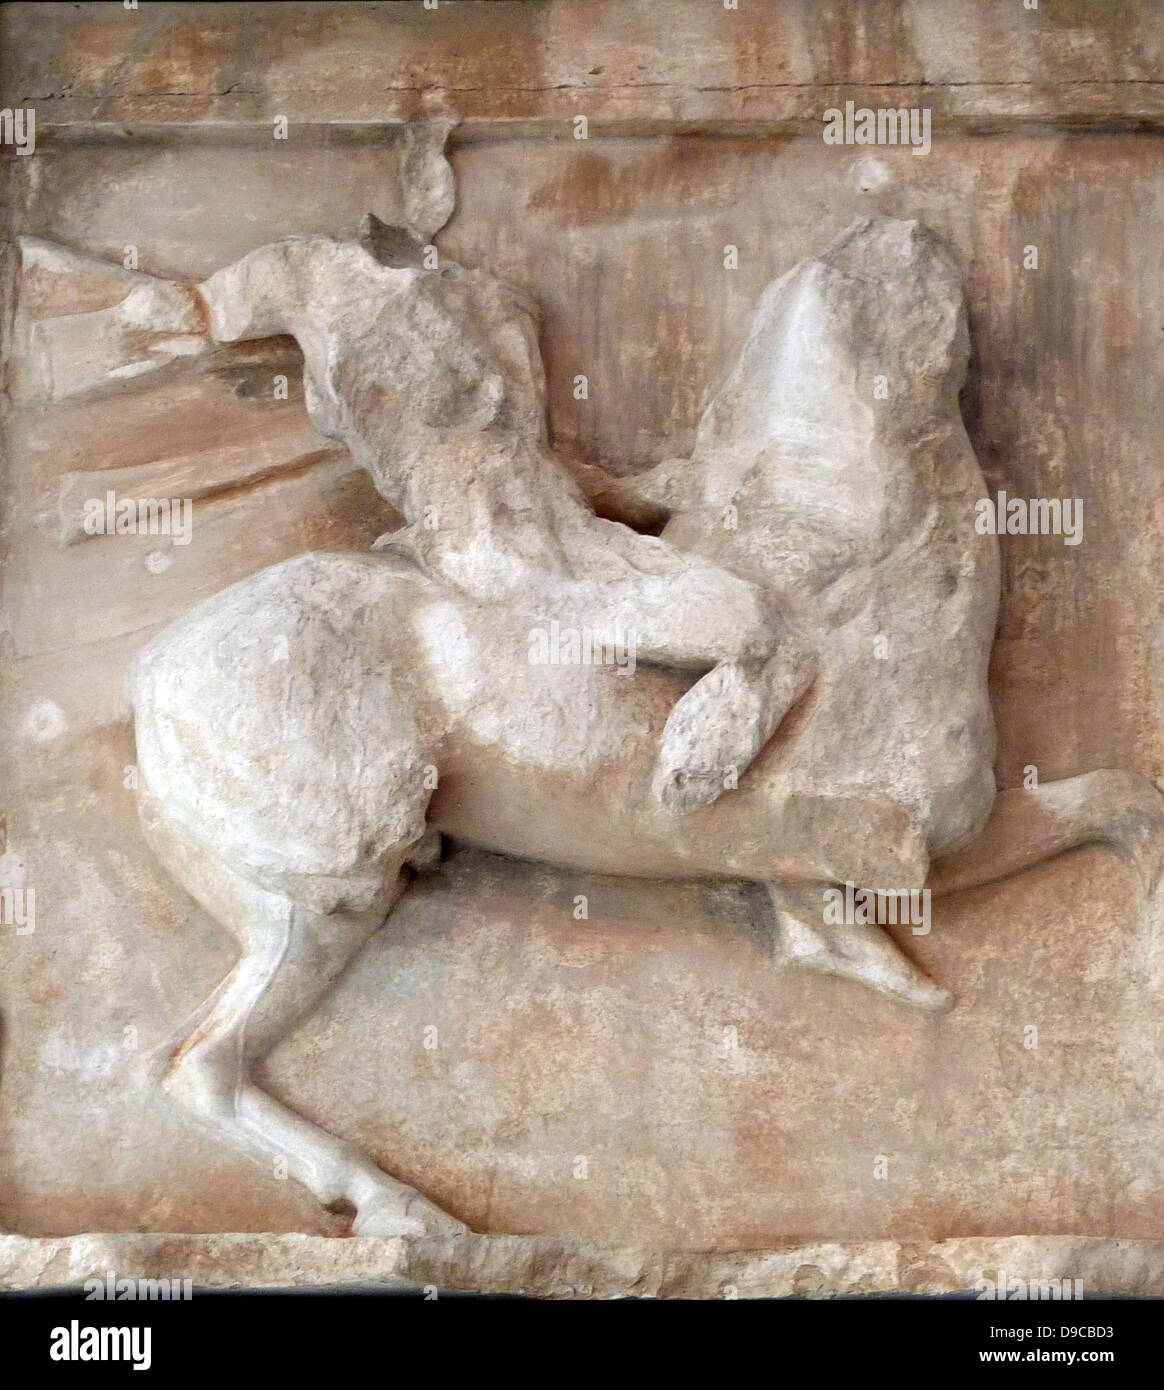 Amazon on horseback (possibly Queen Antiope), depicted in part of the Parthenon friezes at the Parthenon/Acropolis museum, Athens Stock Photo